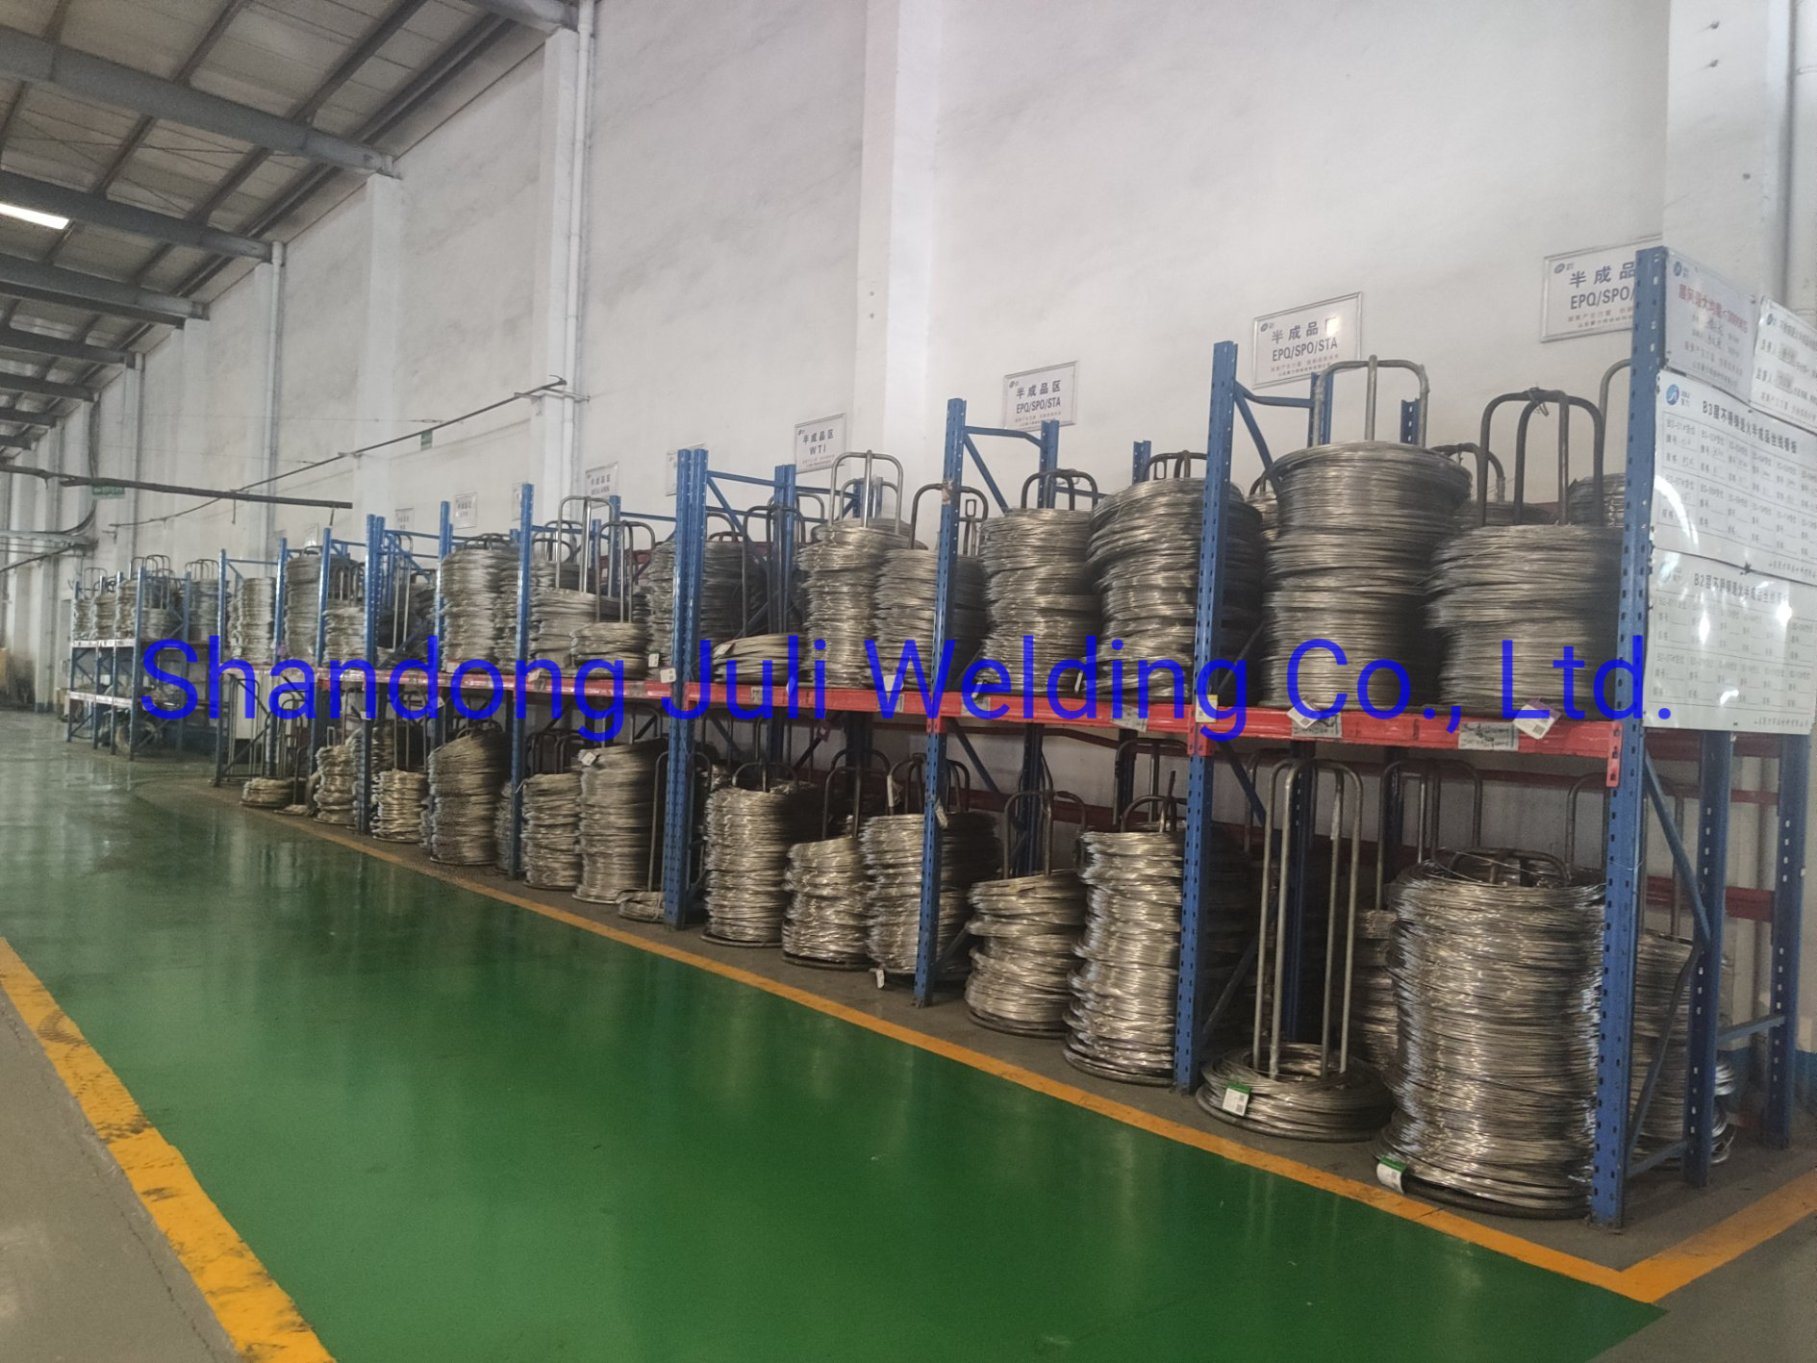 Conveying Net Use High Speed and Strength Quality Low Price Smooth Stainless Steel Wea Stainless Steel Weaving Wire Braiding Wire